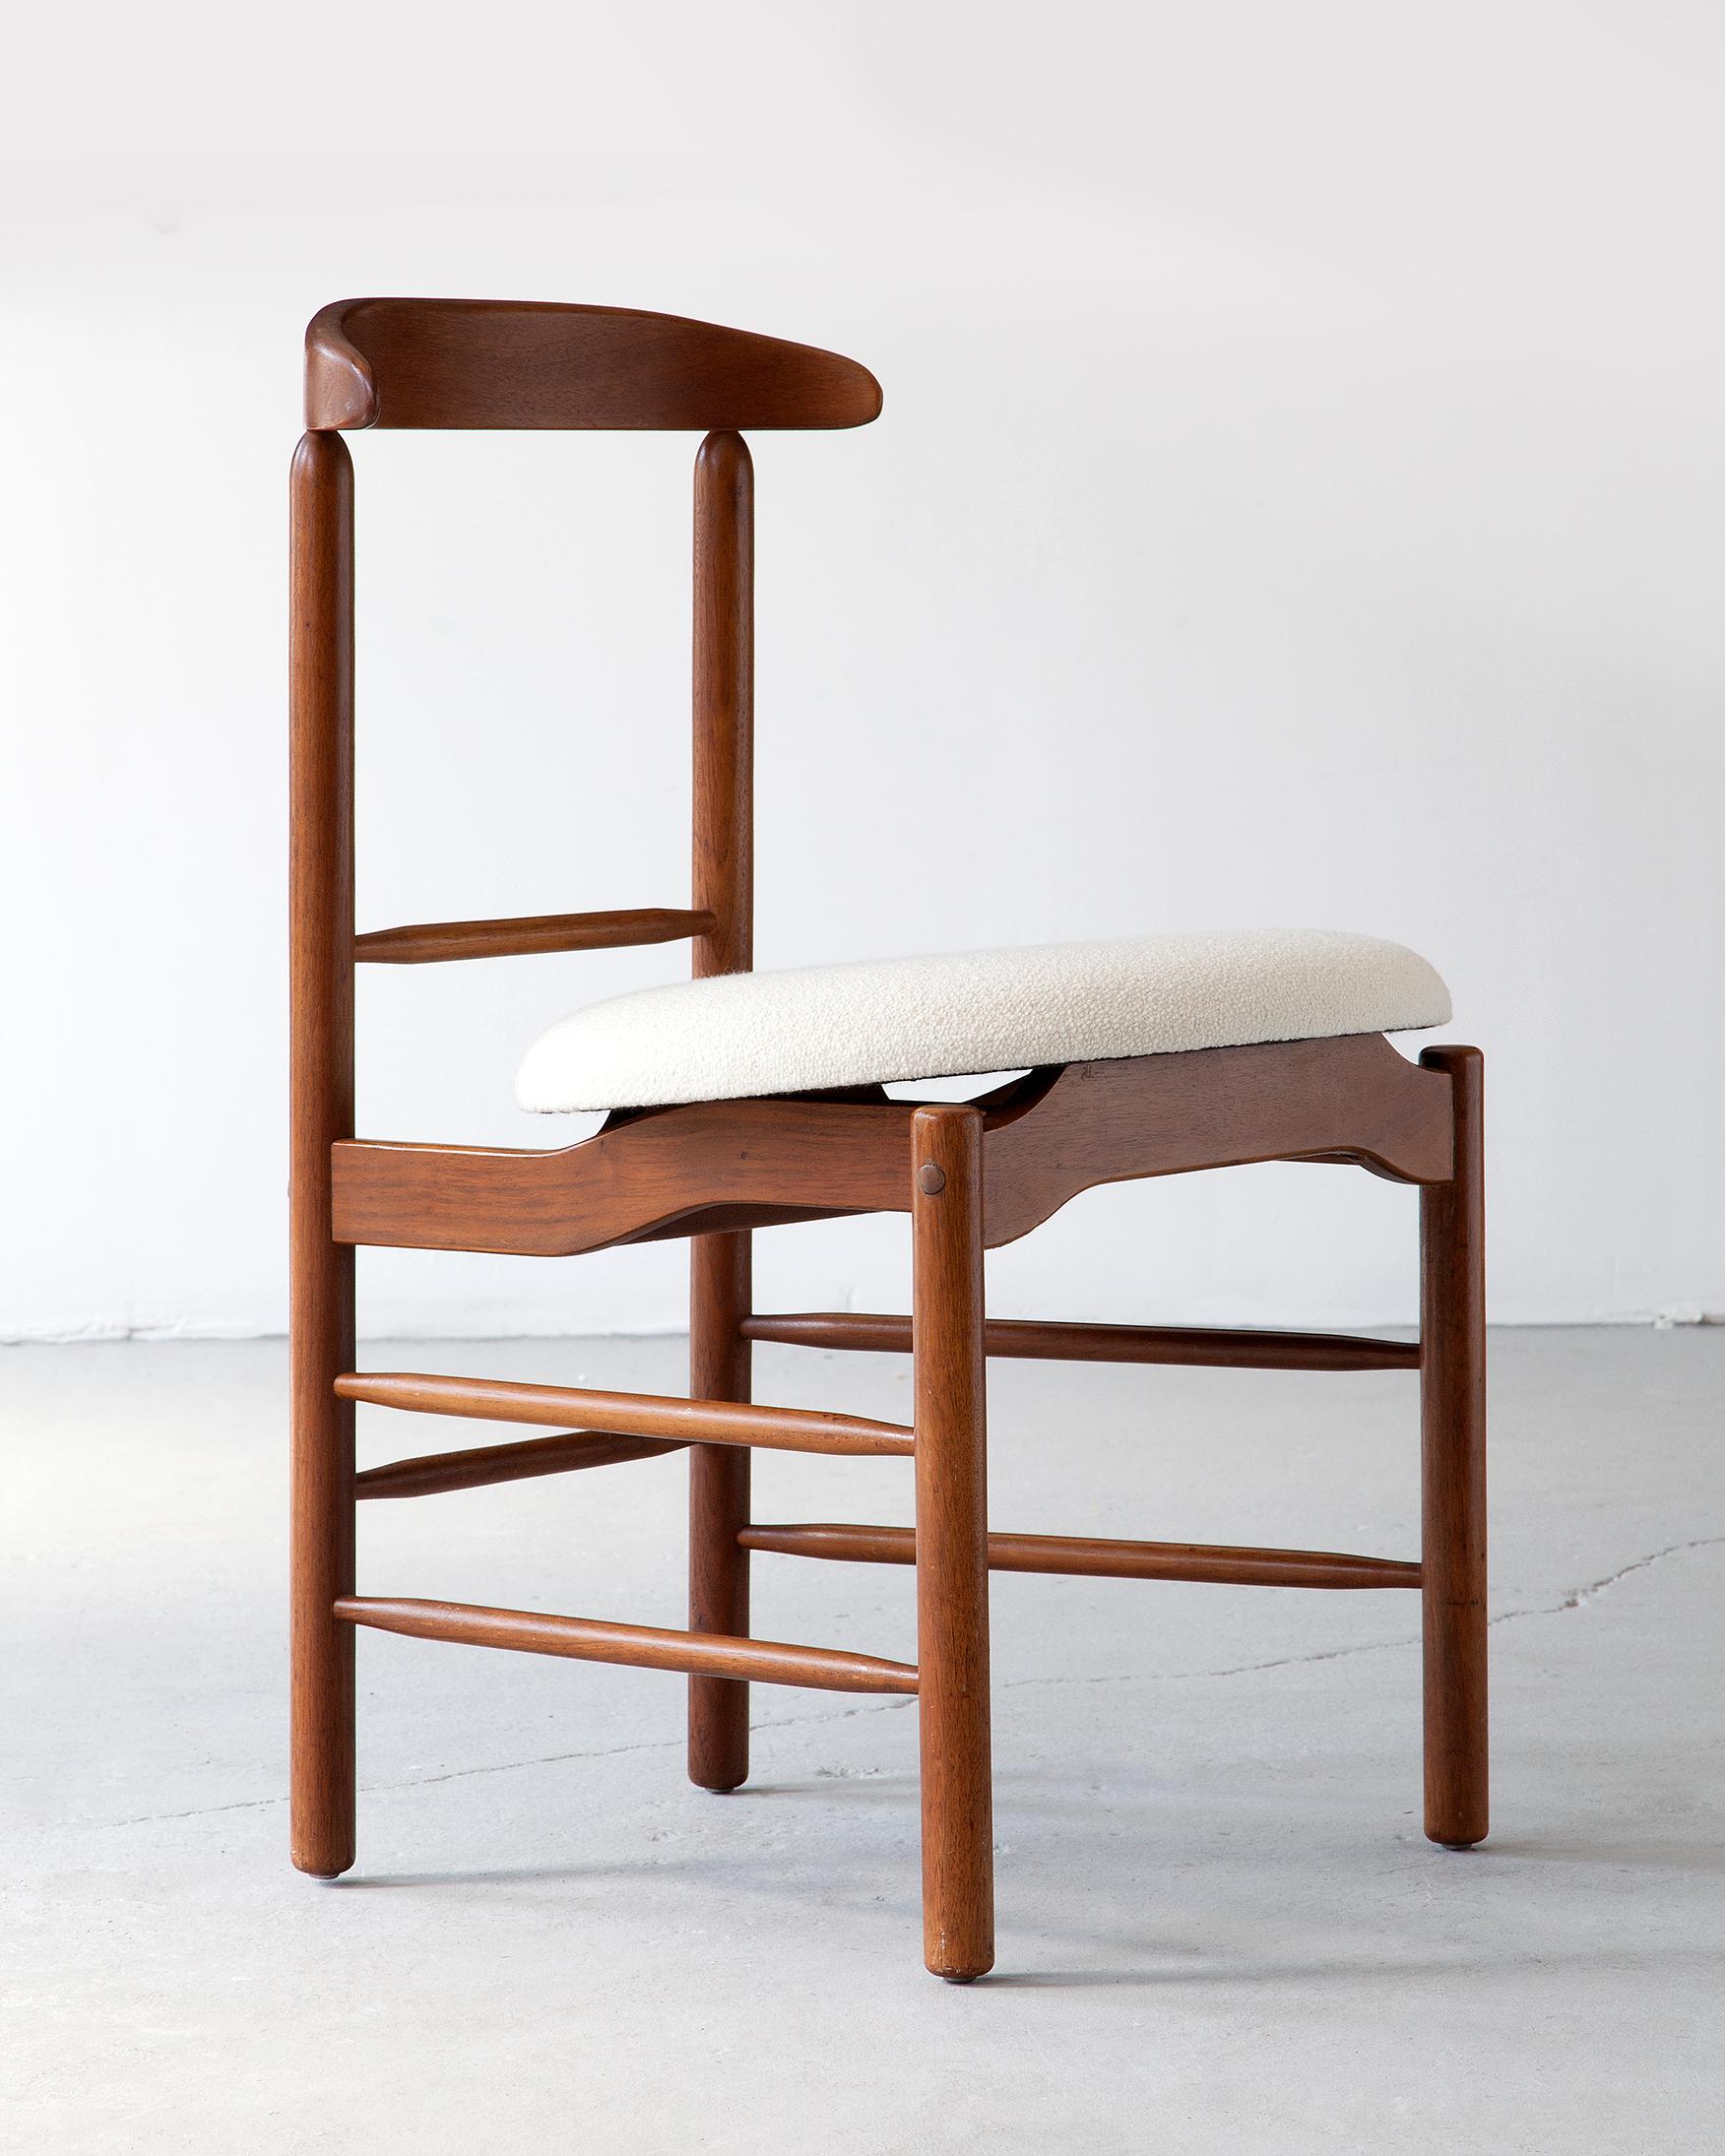 Side chair in walnut with an upholstered seat. Designed by Greta Magnusson Grossman for Glenn of California, Los Angeles, California, circa 1952.